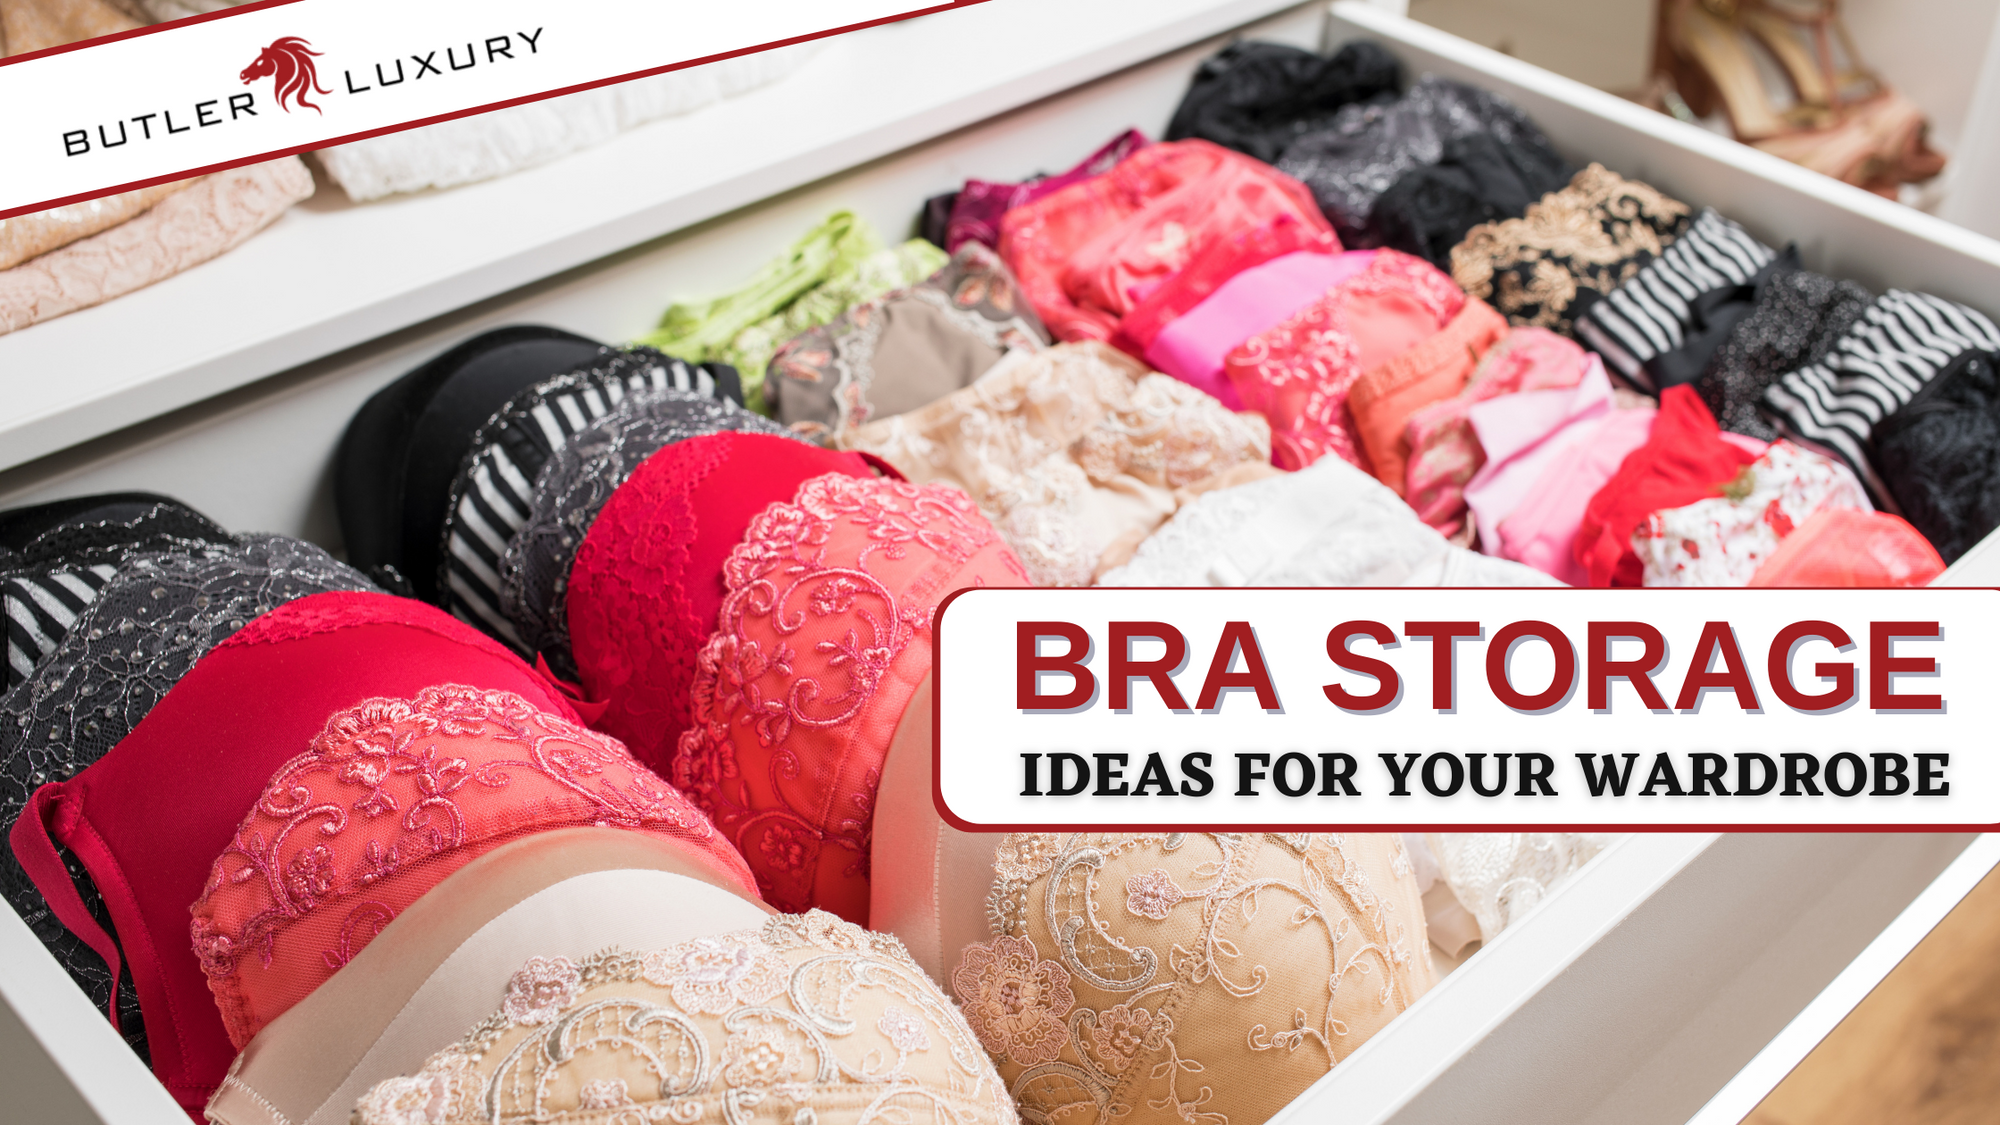 Bring Order to Your Intimates With These Five Bra Storage Ideas